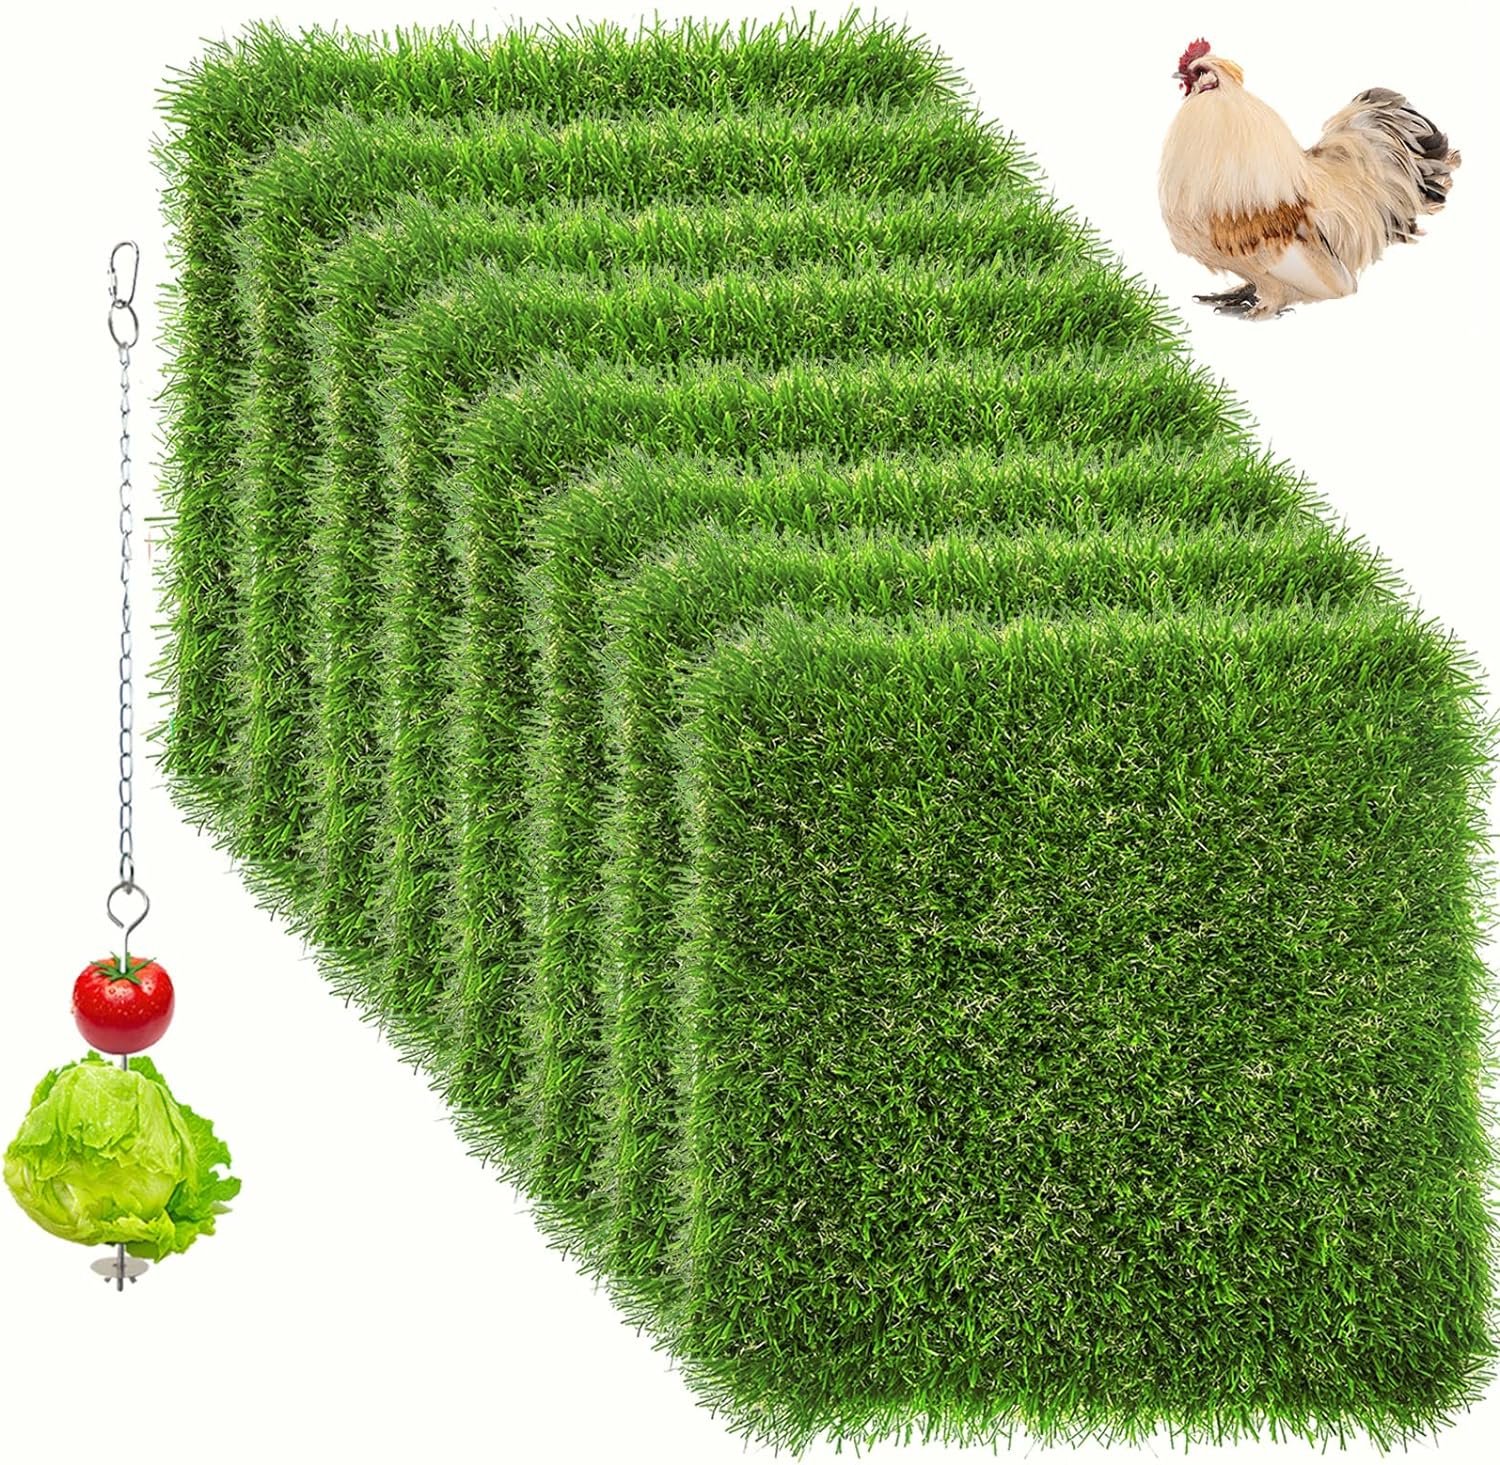 HZxoAxo 8+1 Pack Chicken Nesting Box Pads for Laying Eggs with Vegetable Skewer String Feeder, Washable Nesting Pads for Chicken Coop, Nesting Box Liners Bedding for Hen Indoor Outdoor - 12x121.2